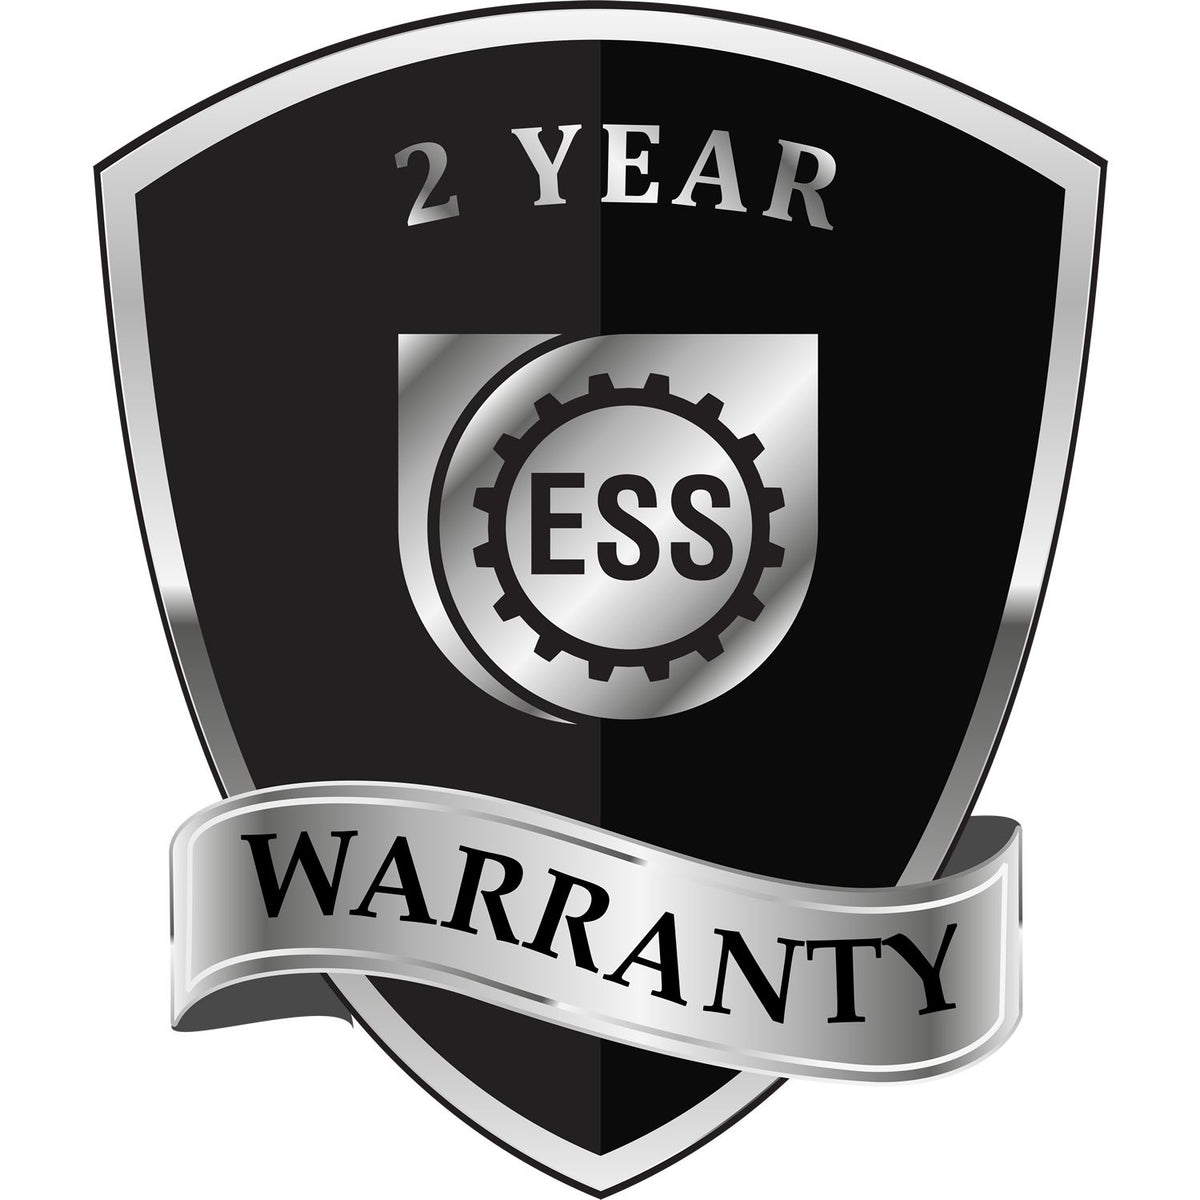 A black and silver badge or emblem showing warranty information for the Heavy Duty Cast Iron District of Columbia Geologist Seal Embosser